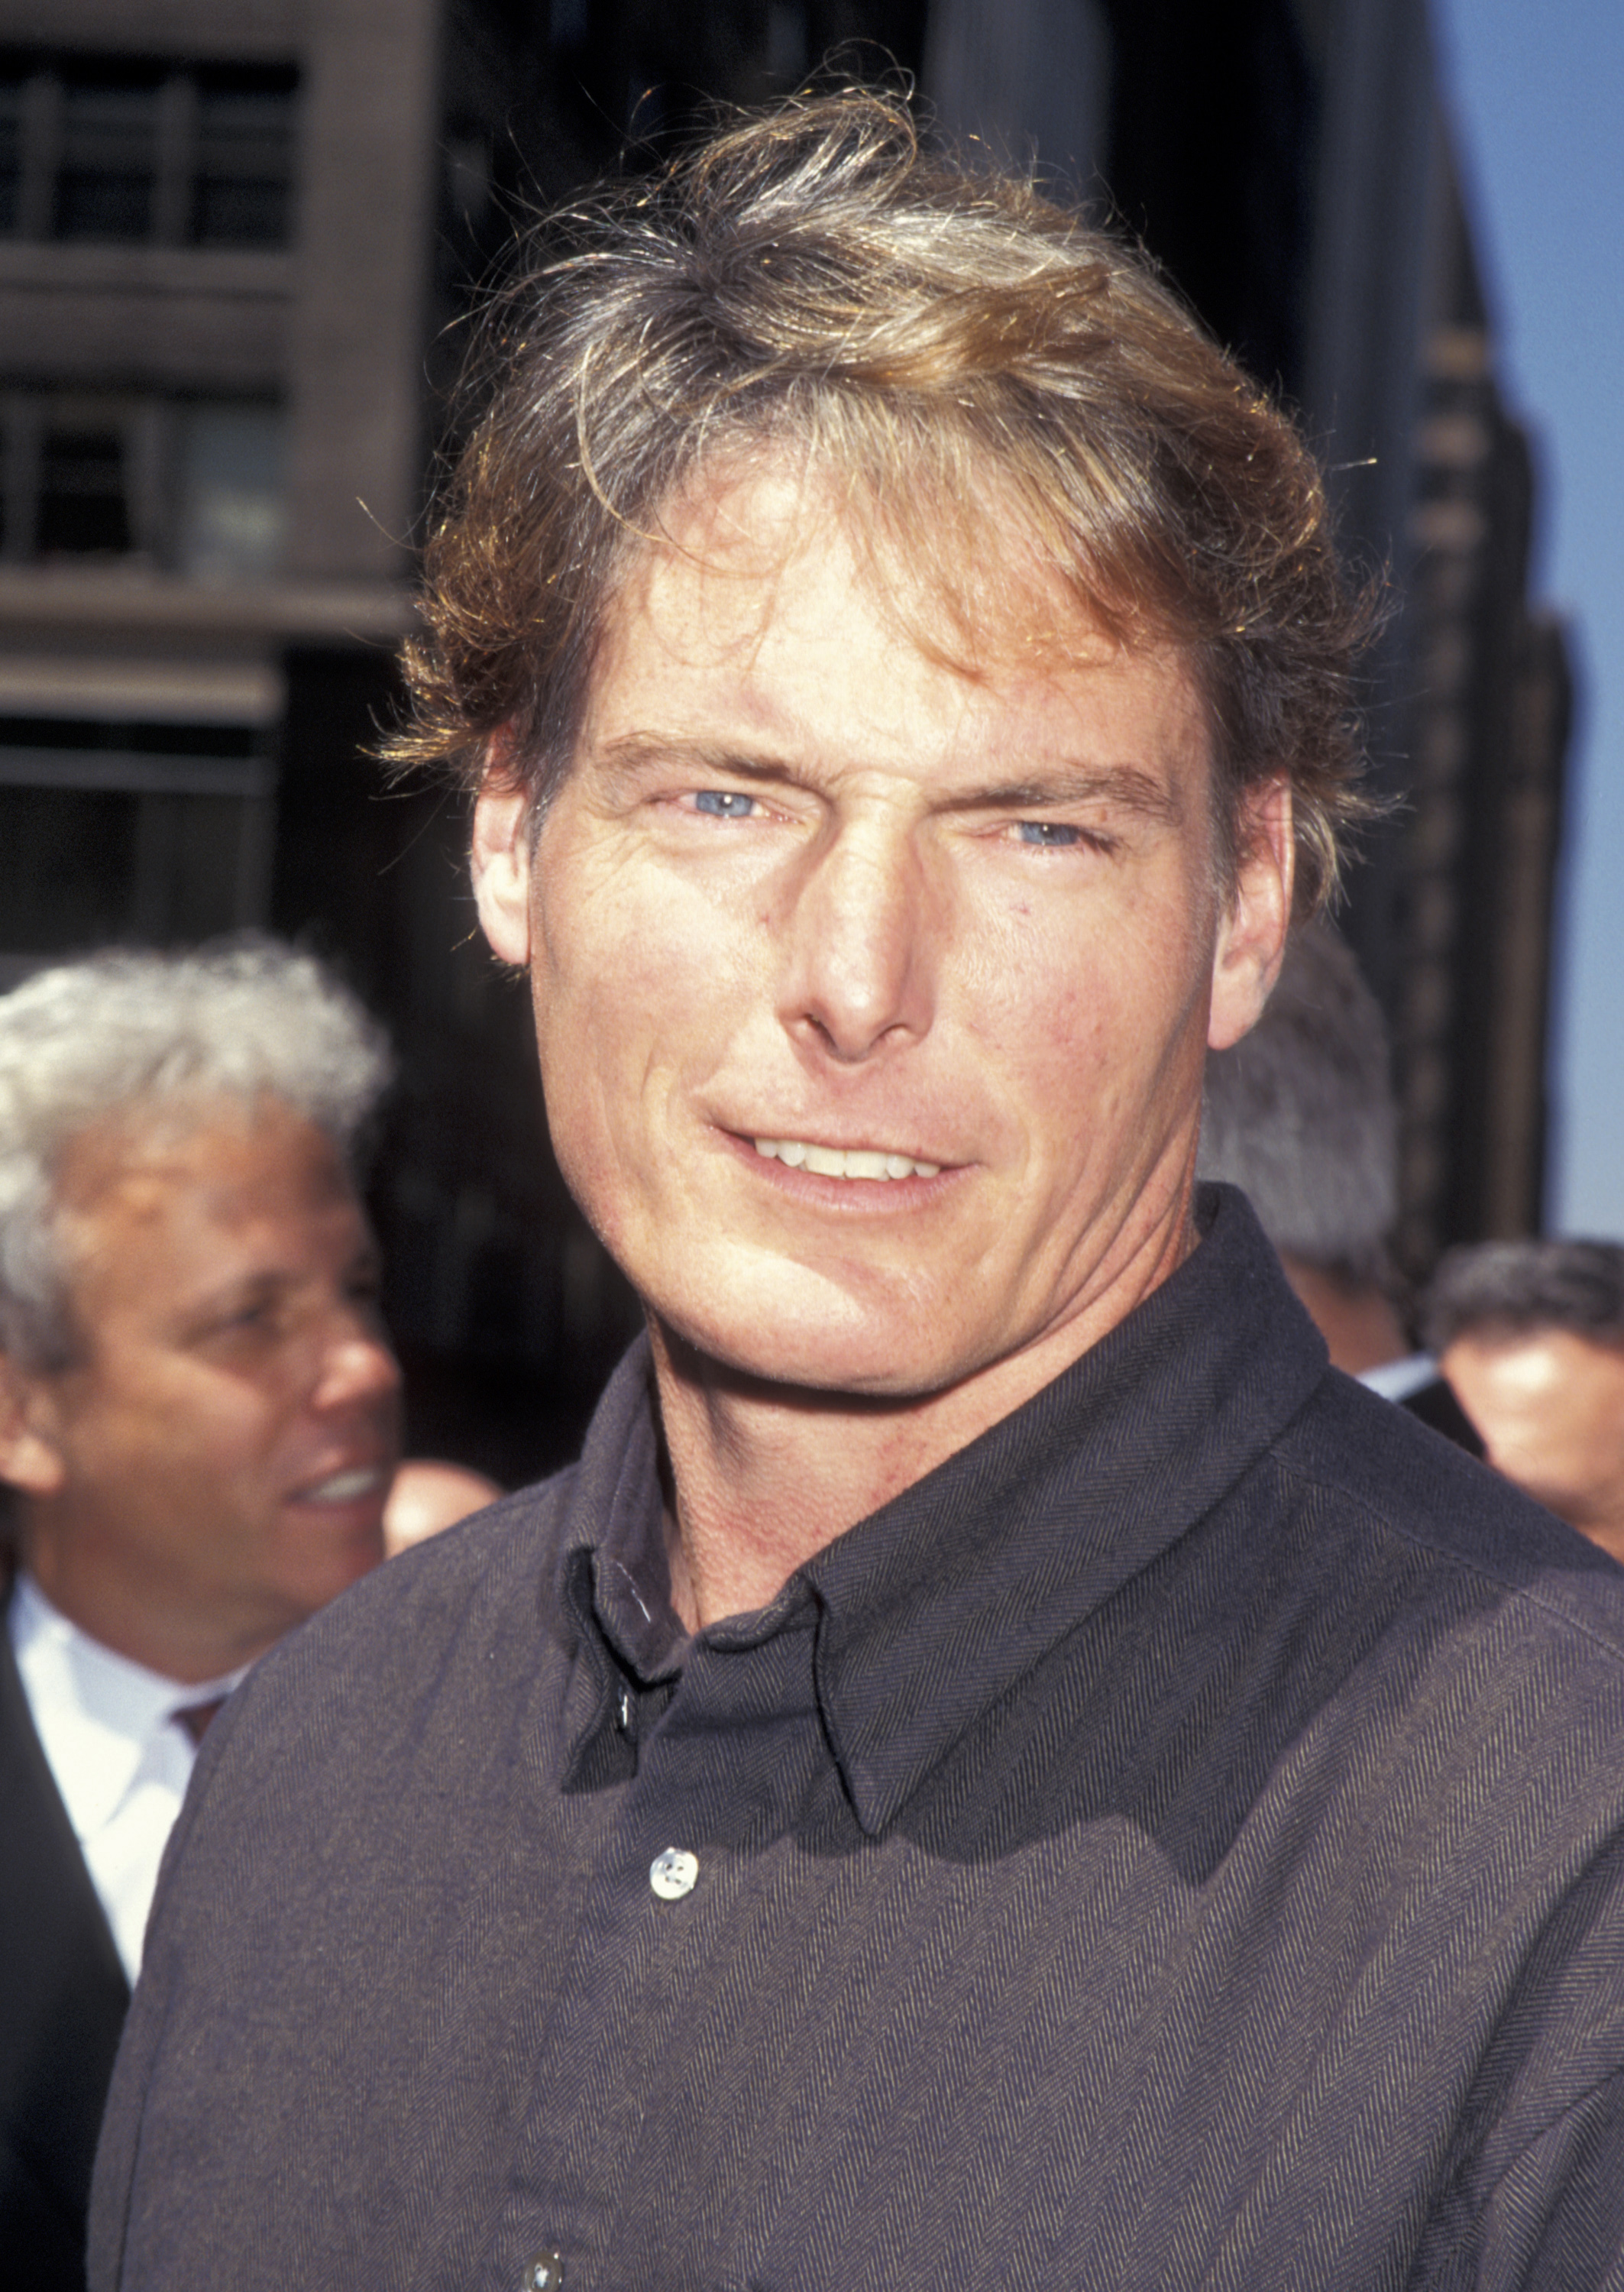 Christopher Reeve während der "Keep It Clean" Creative Coalition Clean Water Rally am 20. April 1995 in New York City. | Quelle: Getty Images